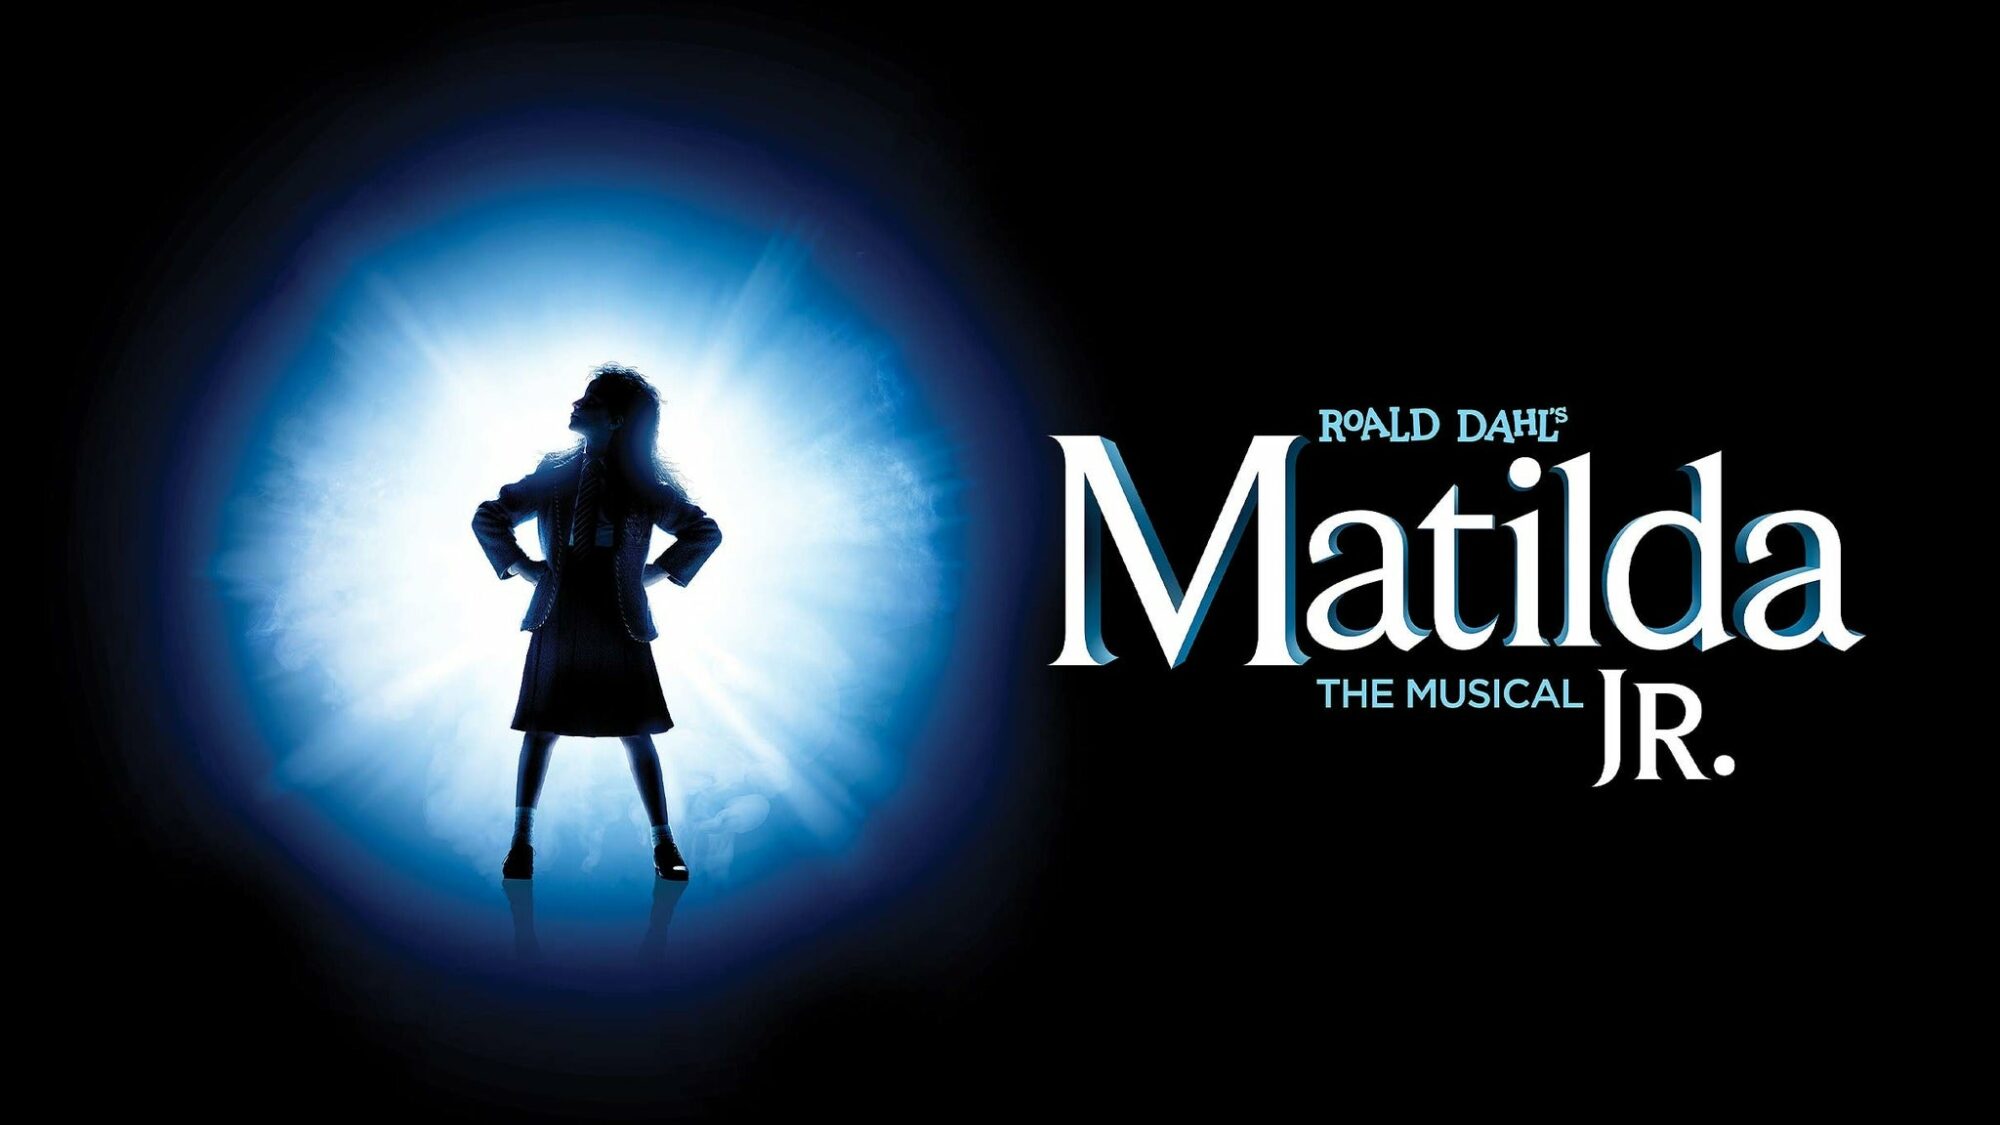 Image name Matilda Jr The Musical at Whitby Pavilion Theatre Whitby the 20 image from the post Events in Yorkshire.com.